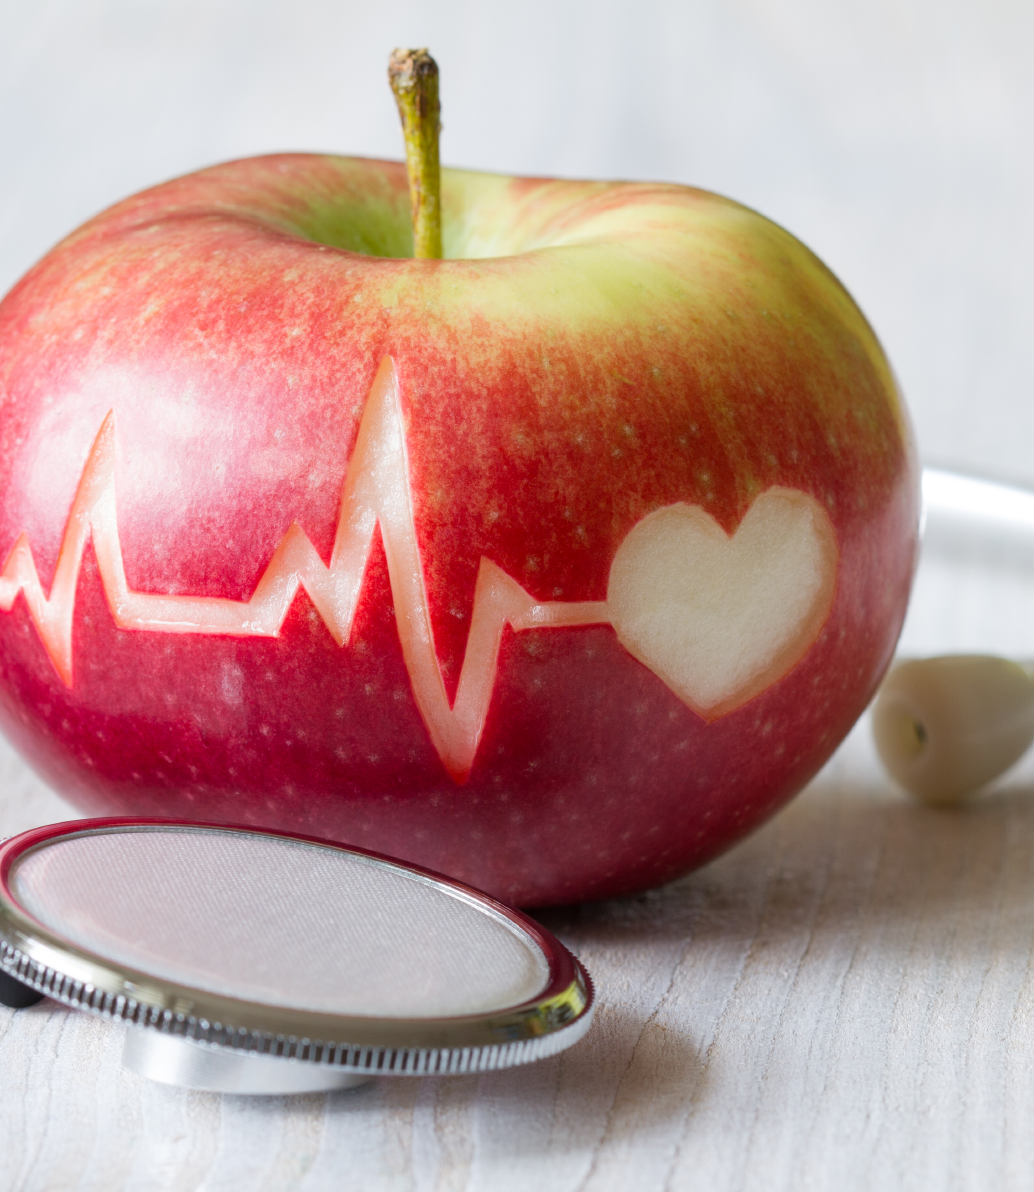 Stethoscope and apple; apple has monitor waves and a heart carved into its peel